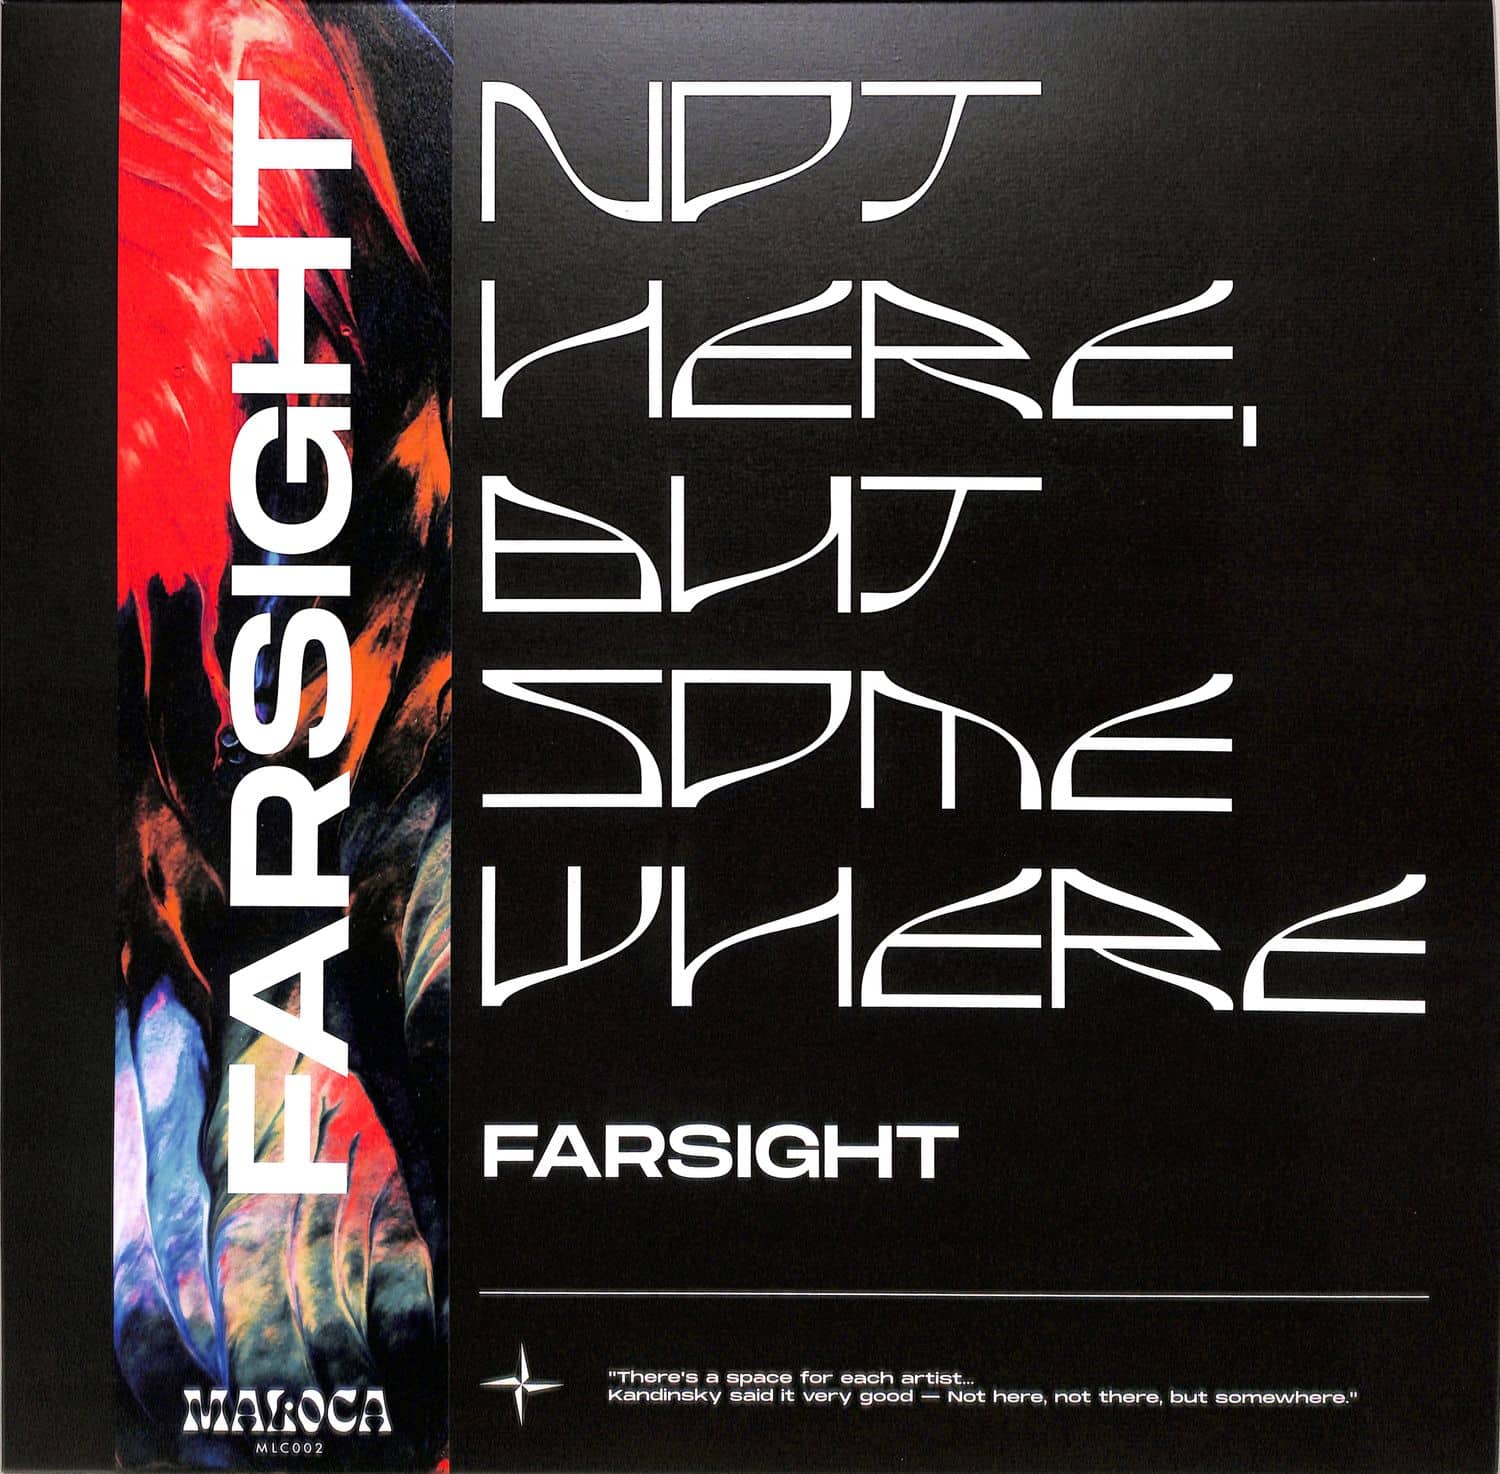 Farsight - NOT HERE, BUT SOMEWHERE